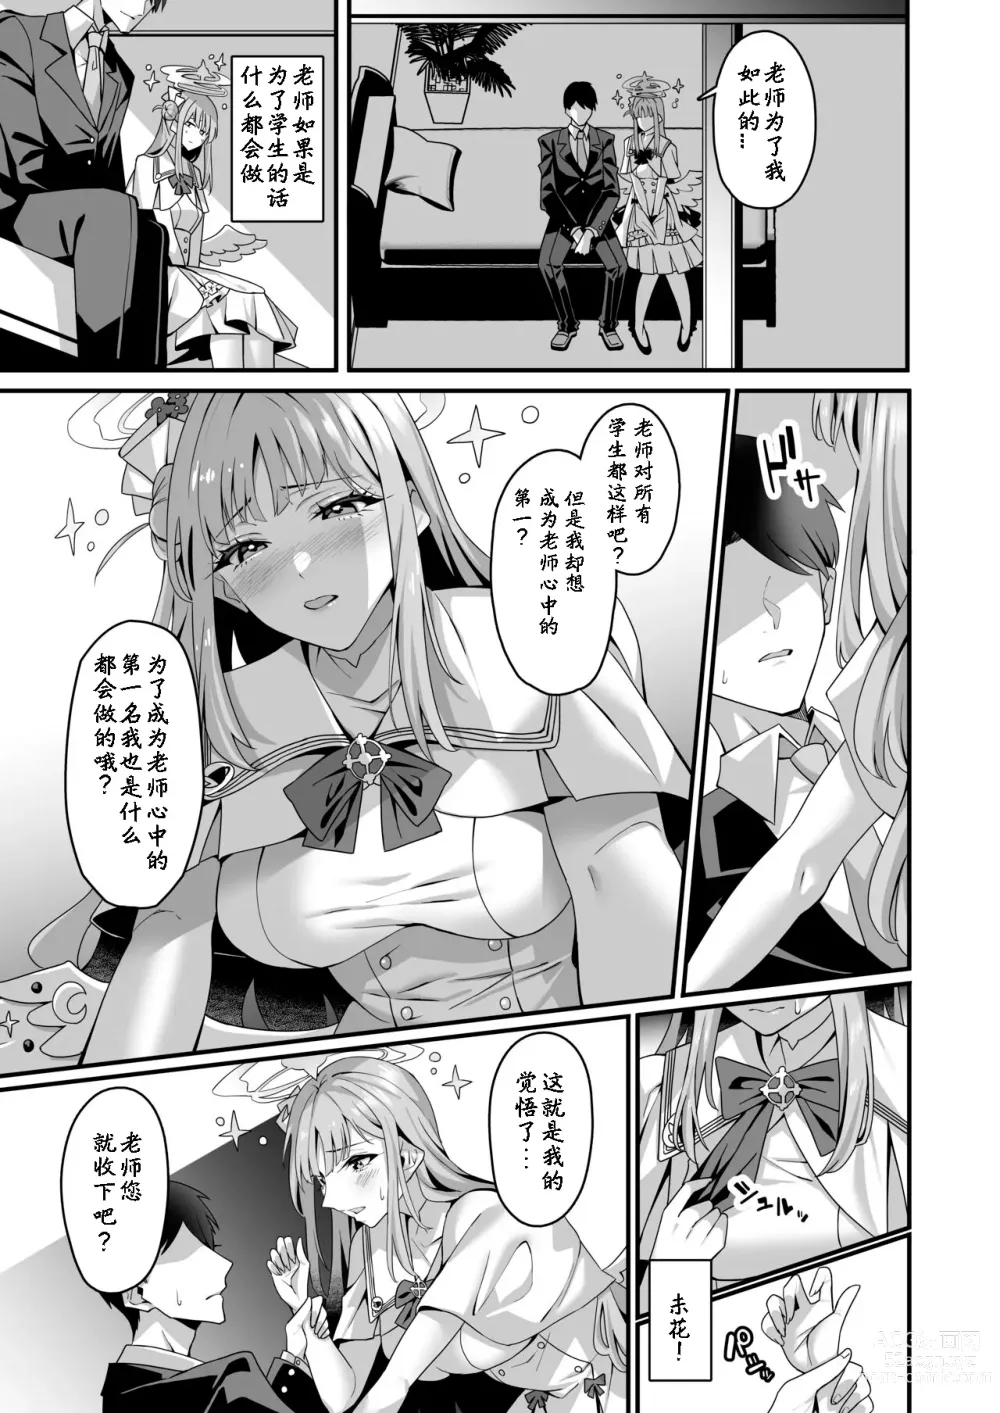 Page 4 of doujinshi Mika to Happy Love Love Sex Shite Haramaseru Hon - A book about happy loving sex with Mika and impregnation.